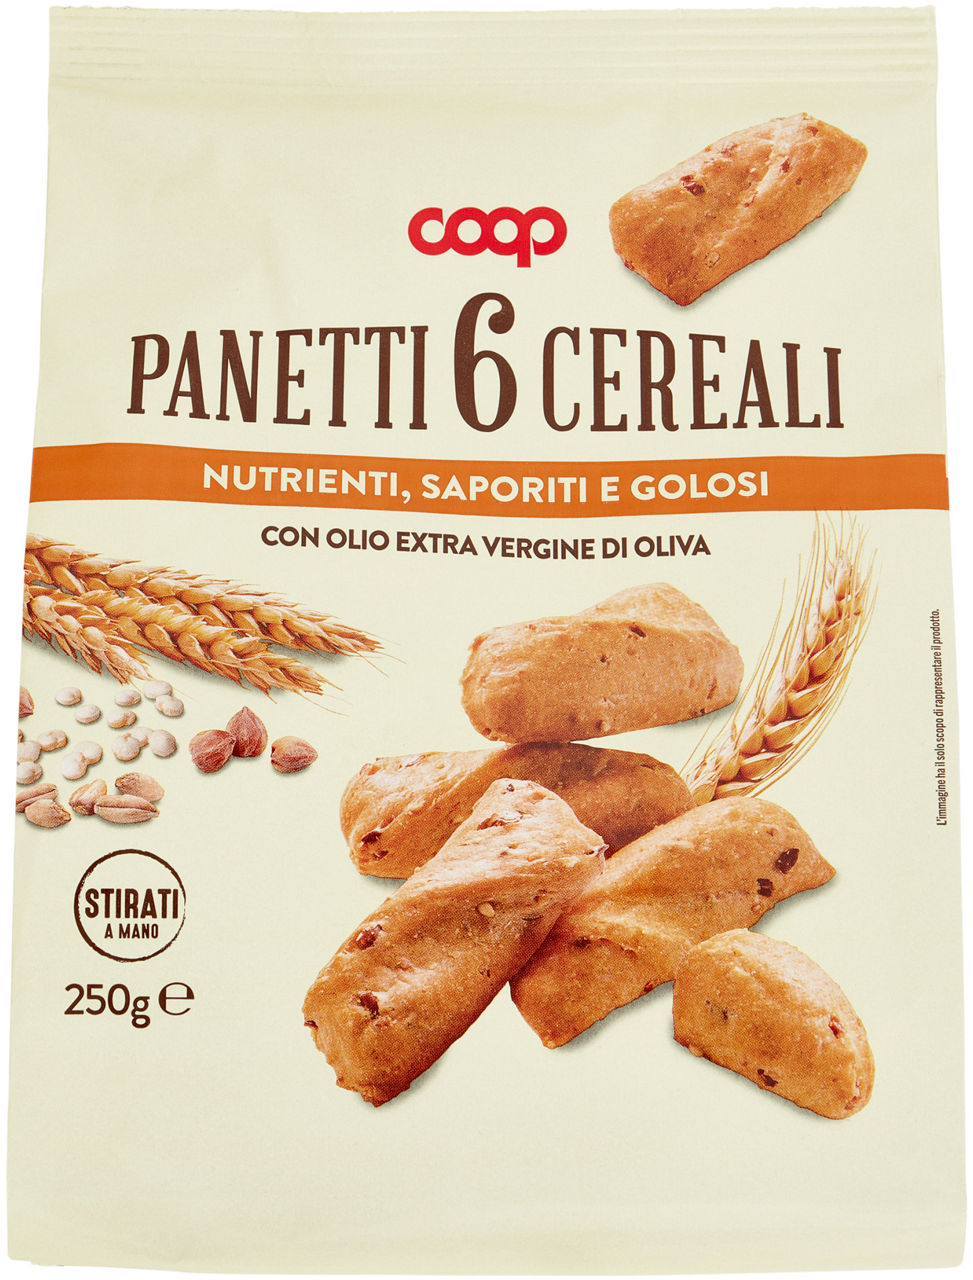 Panetti 6 cereali coop g250